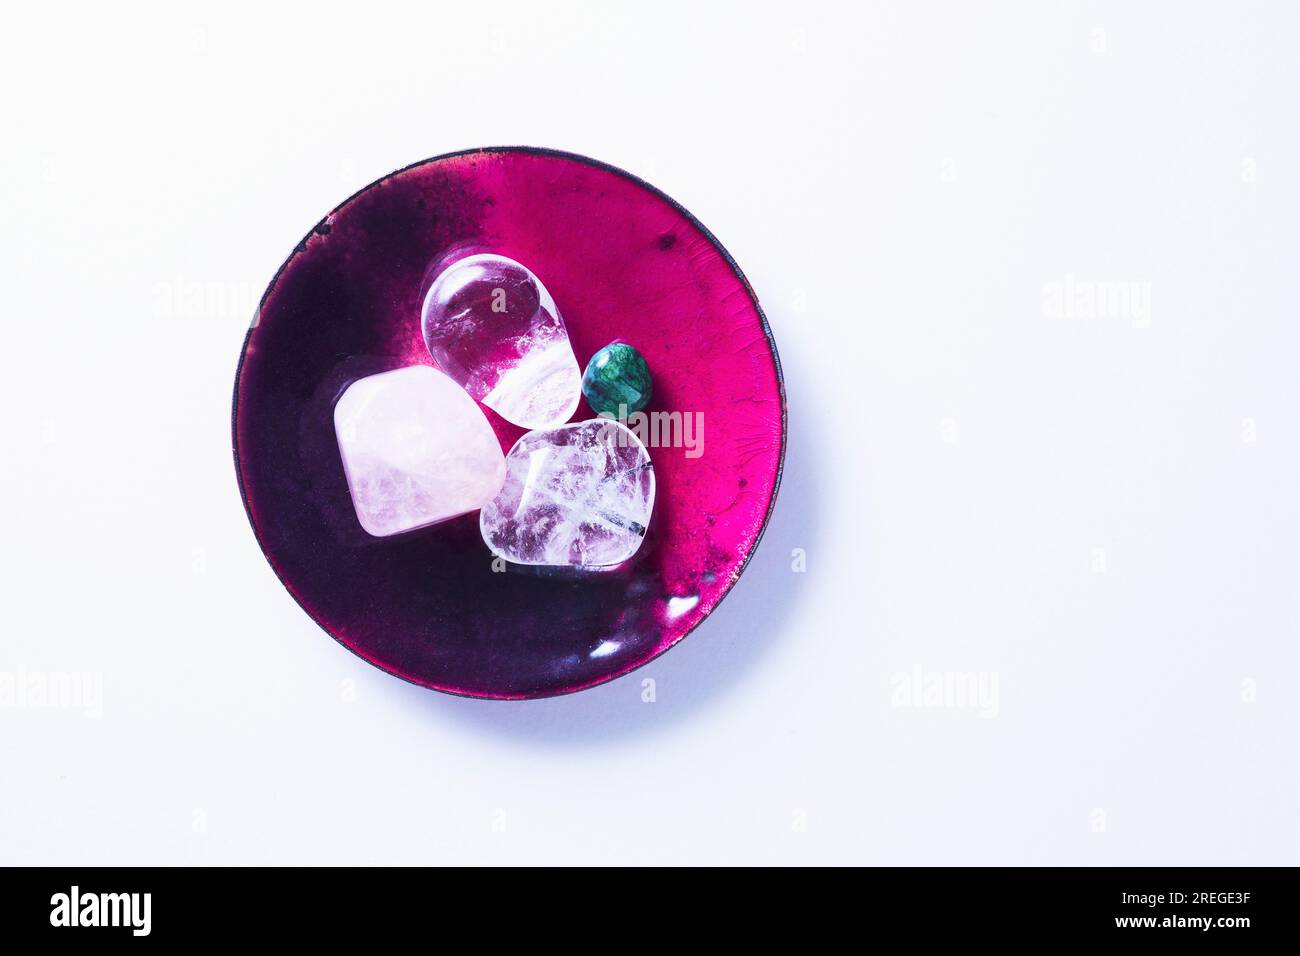 Top view on several colored gems against white Stock Photo